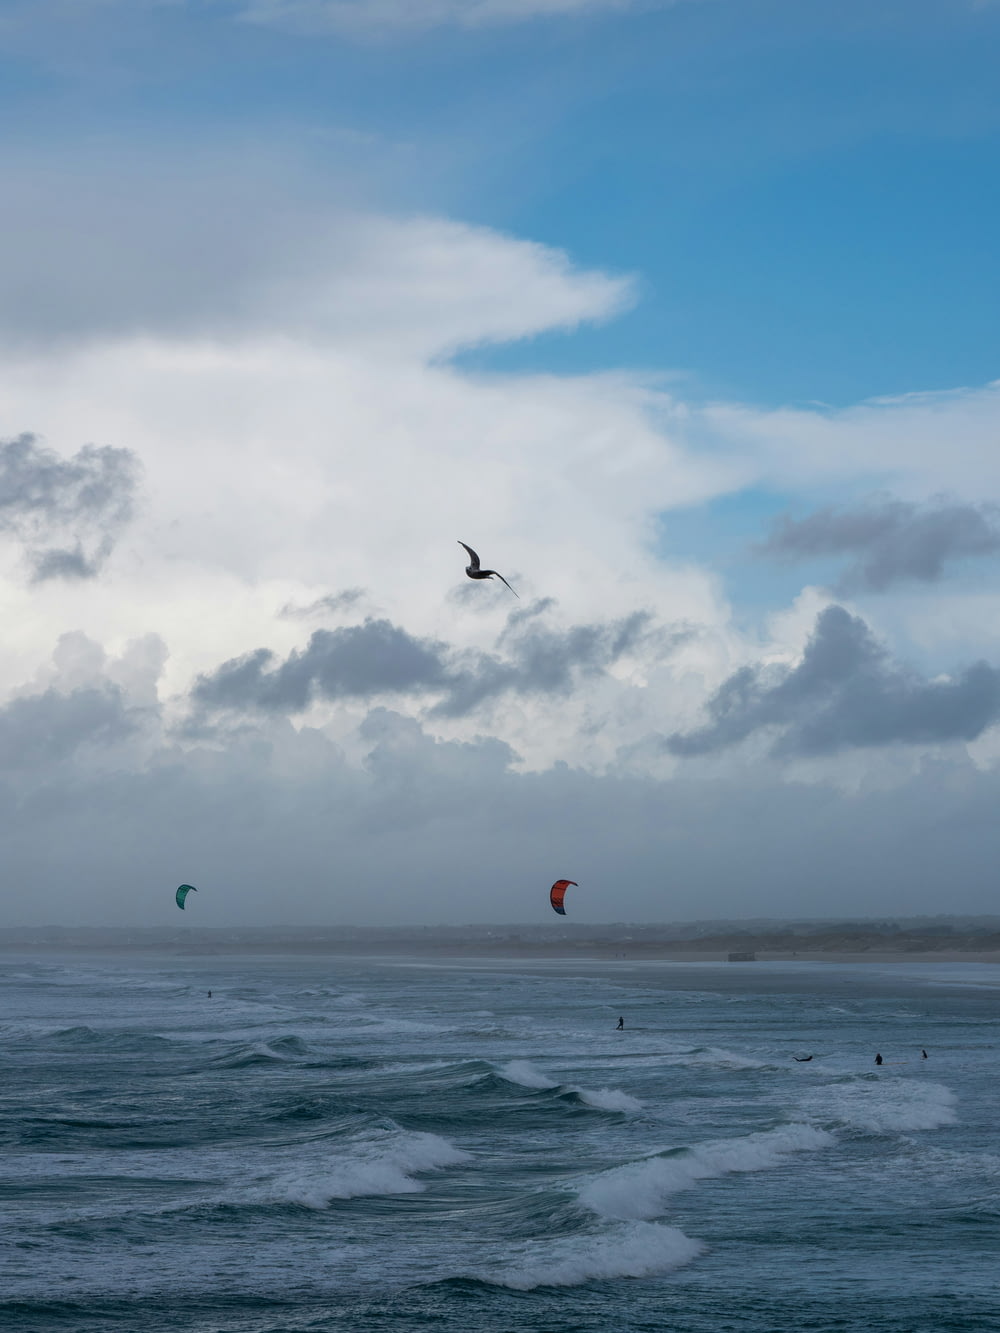 a group of kites flying over the ocean under a cloudy sky